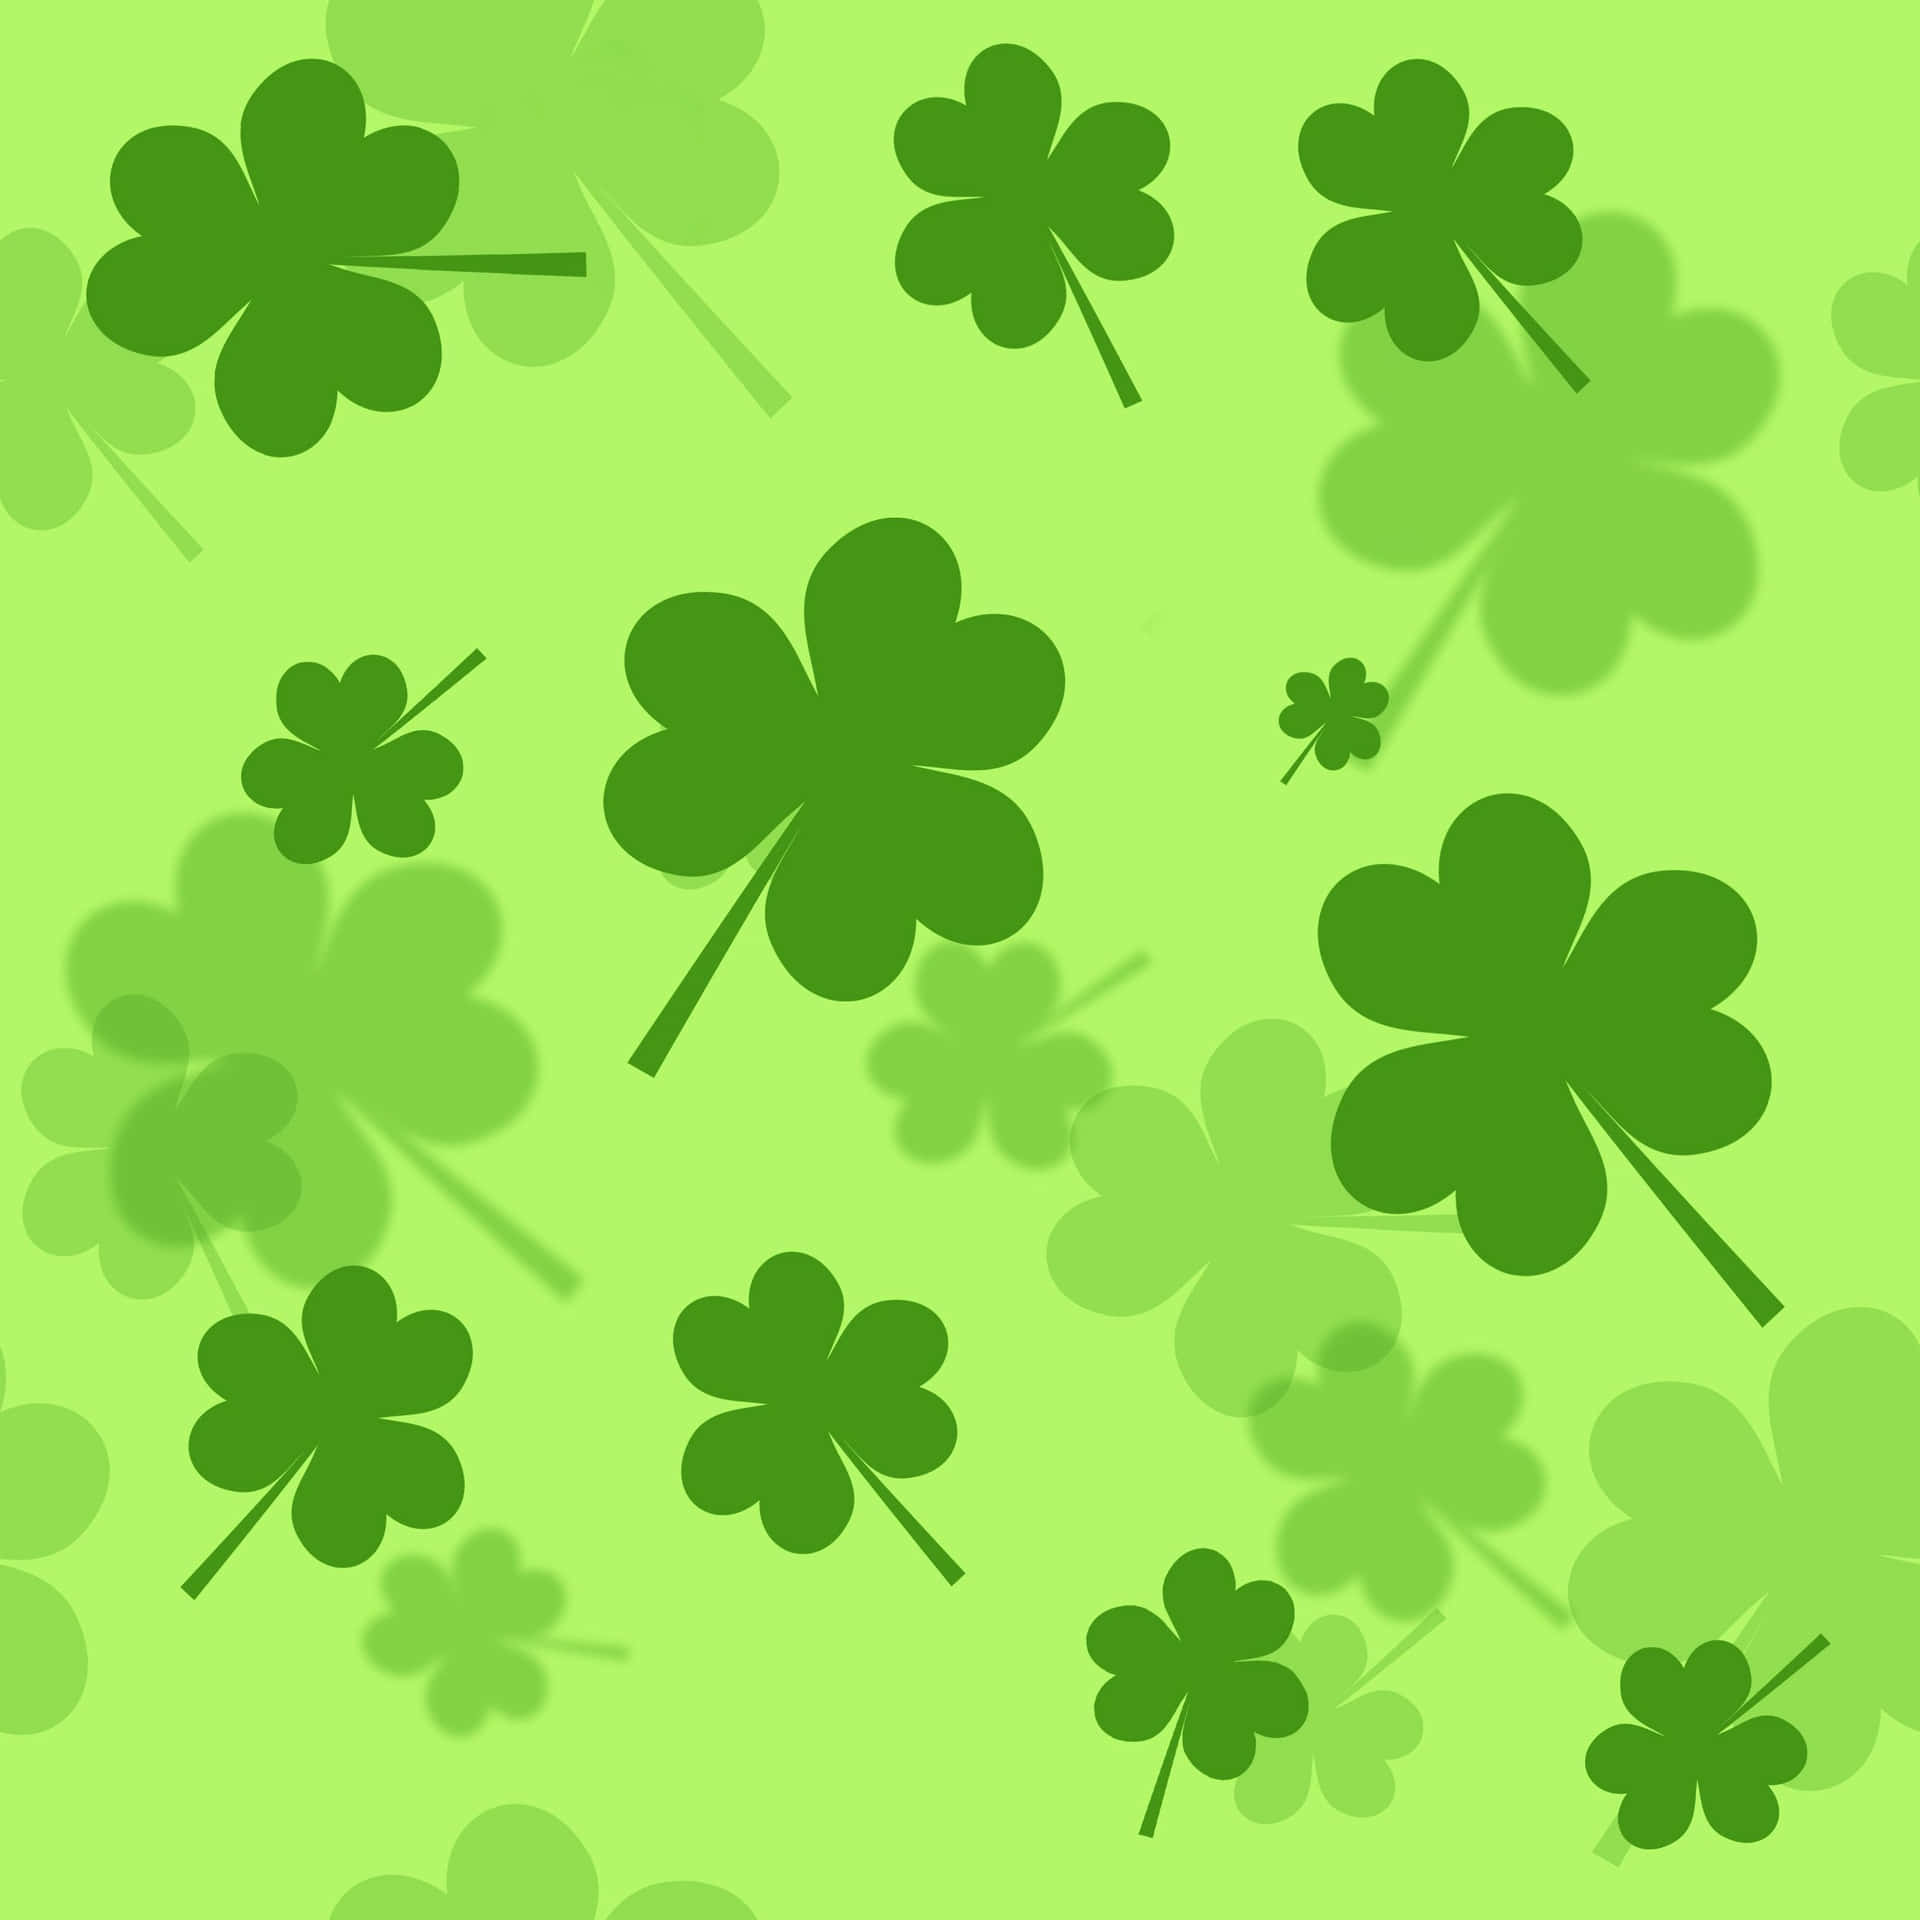 Haven't you heard? Shamrocks are having a moment. Wallpaper